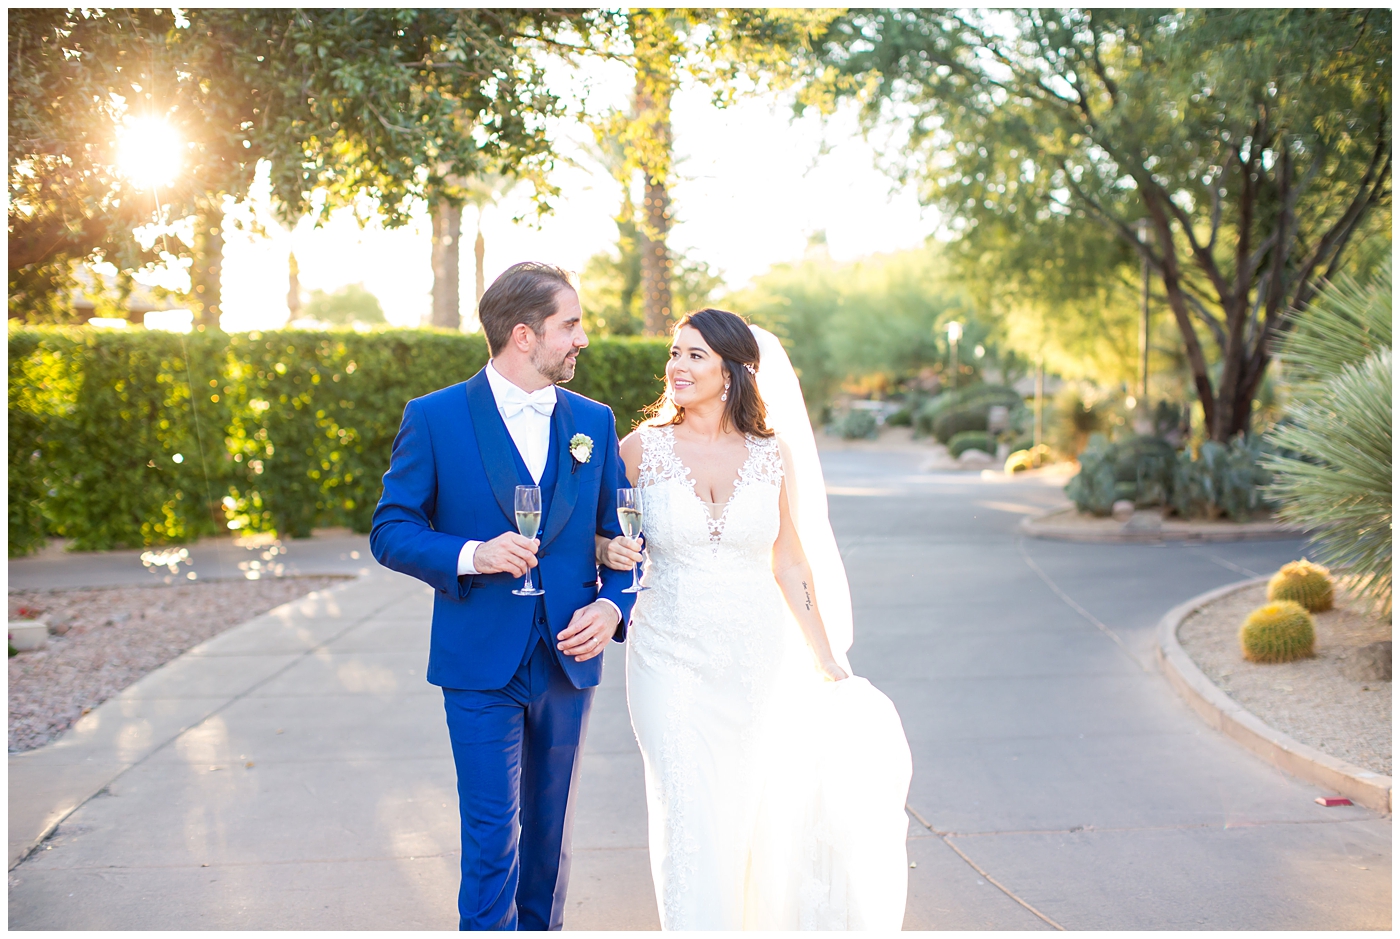 Bride in Justina Alexander dress with groom in custom Brother's Tailors blue suit walking with linked arms